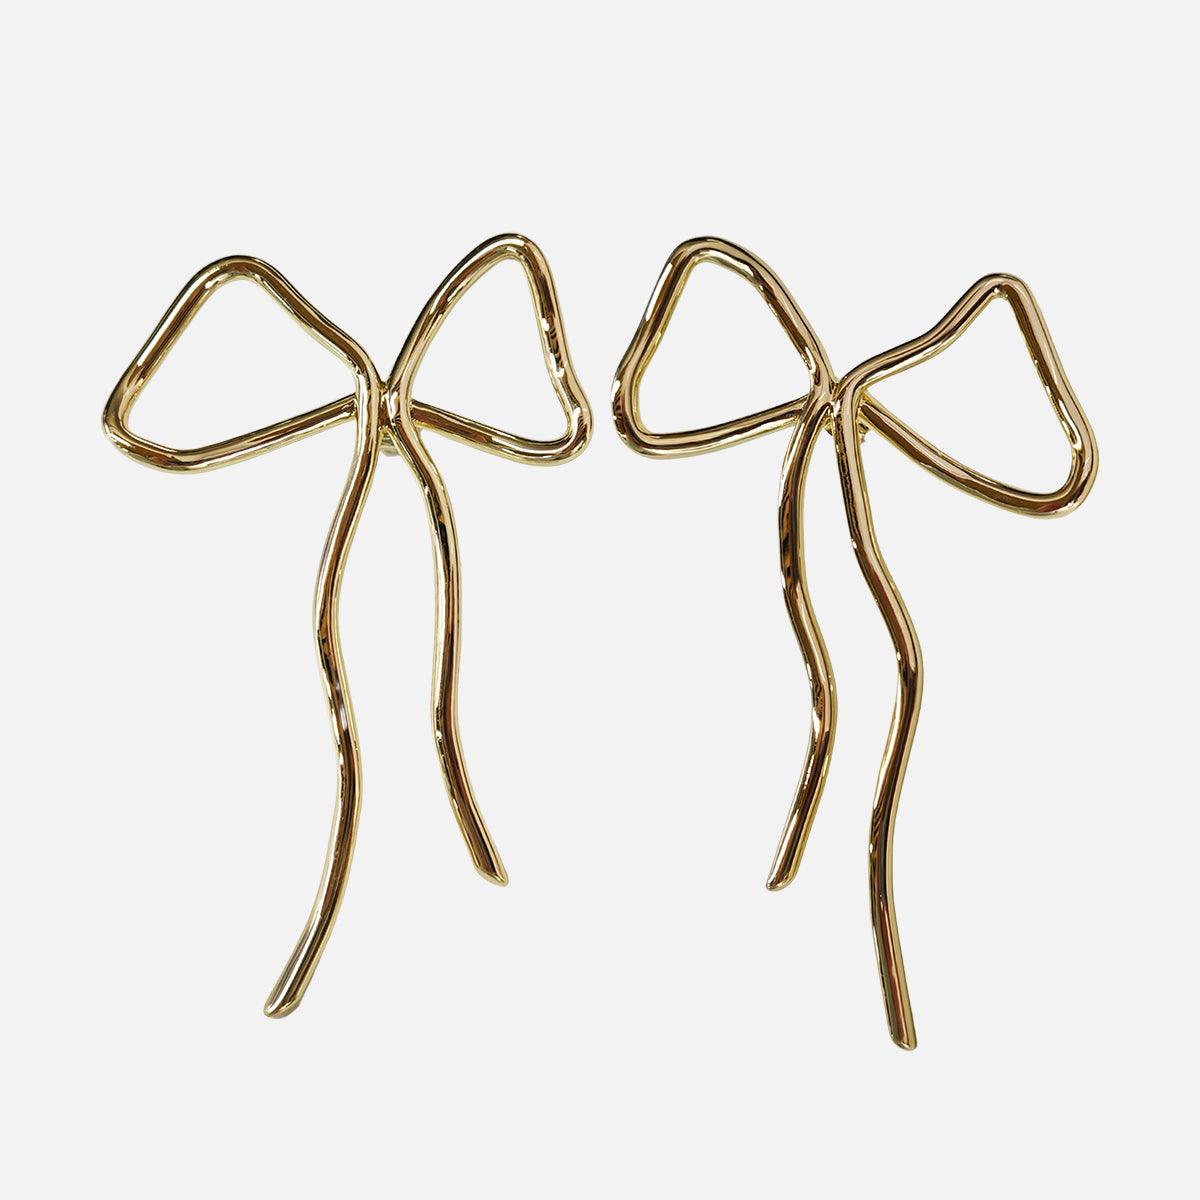 The Bows Earrings - At Present